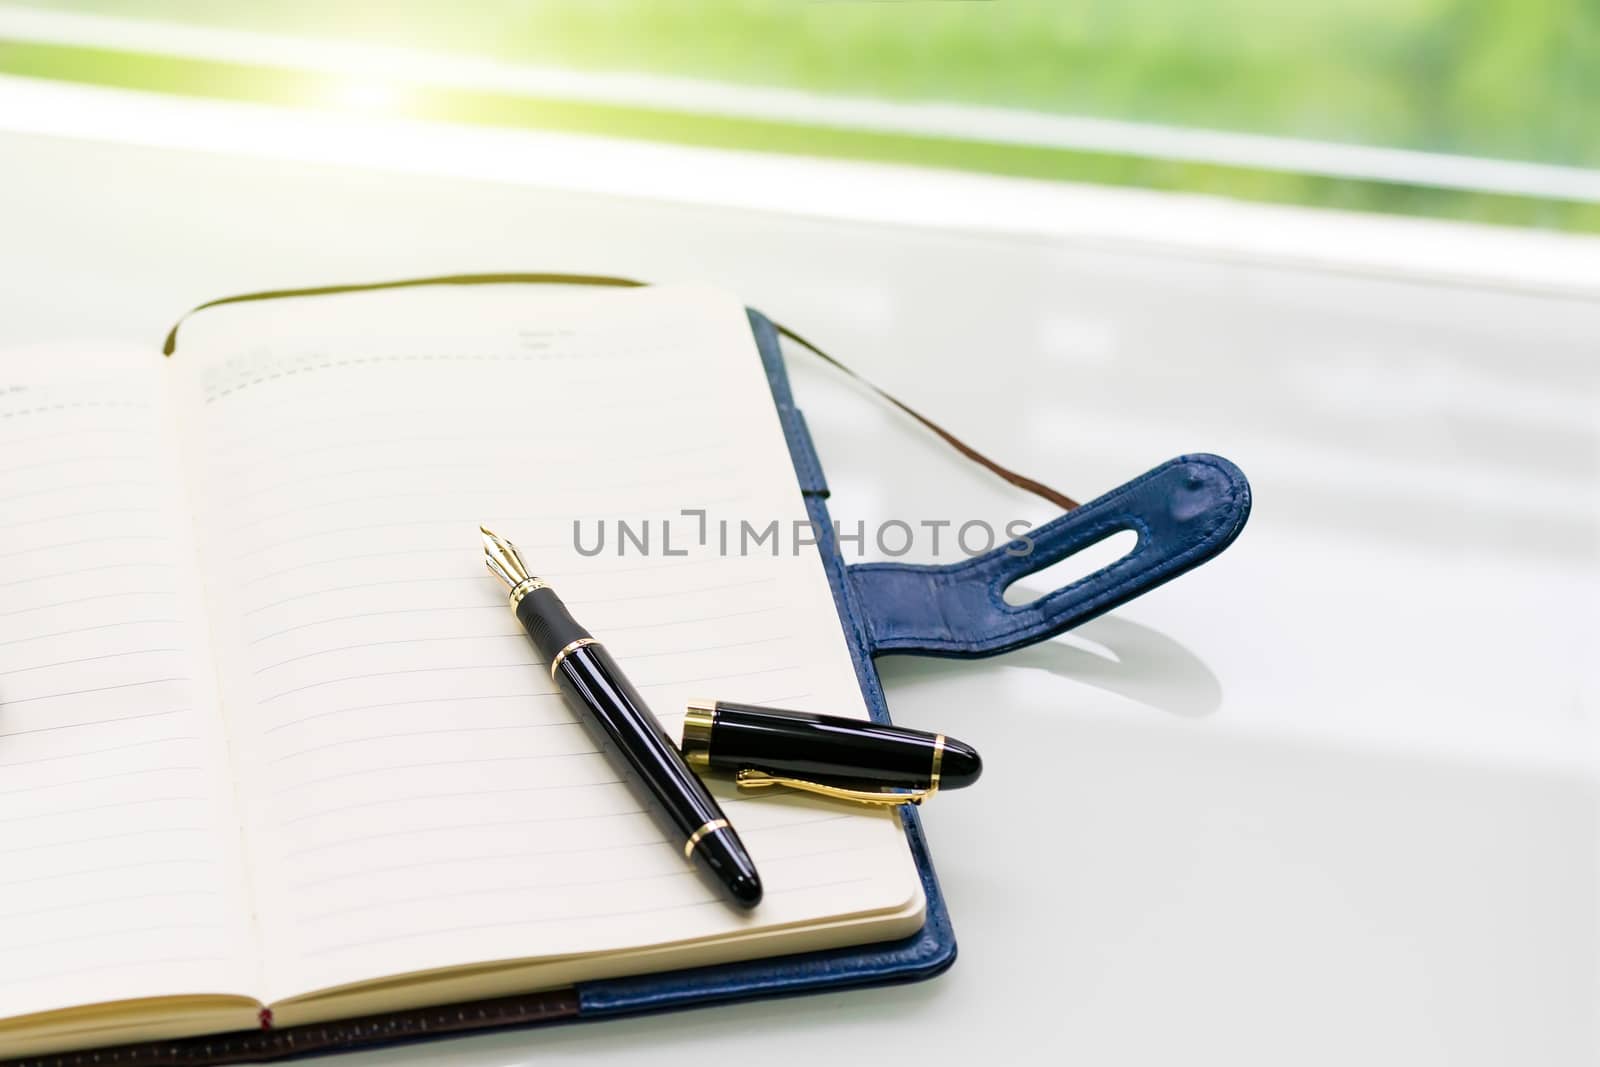 pen and notebook on the white table near window, sideview with green light backgrounds